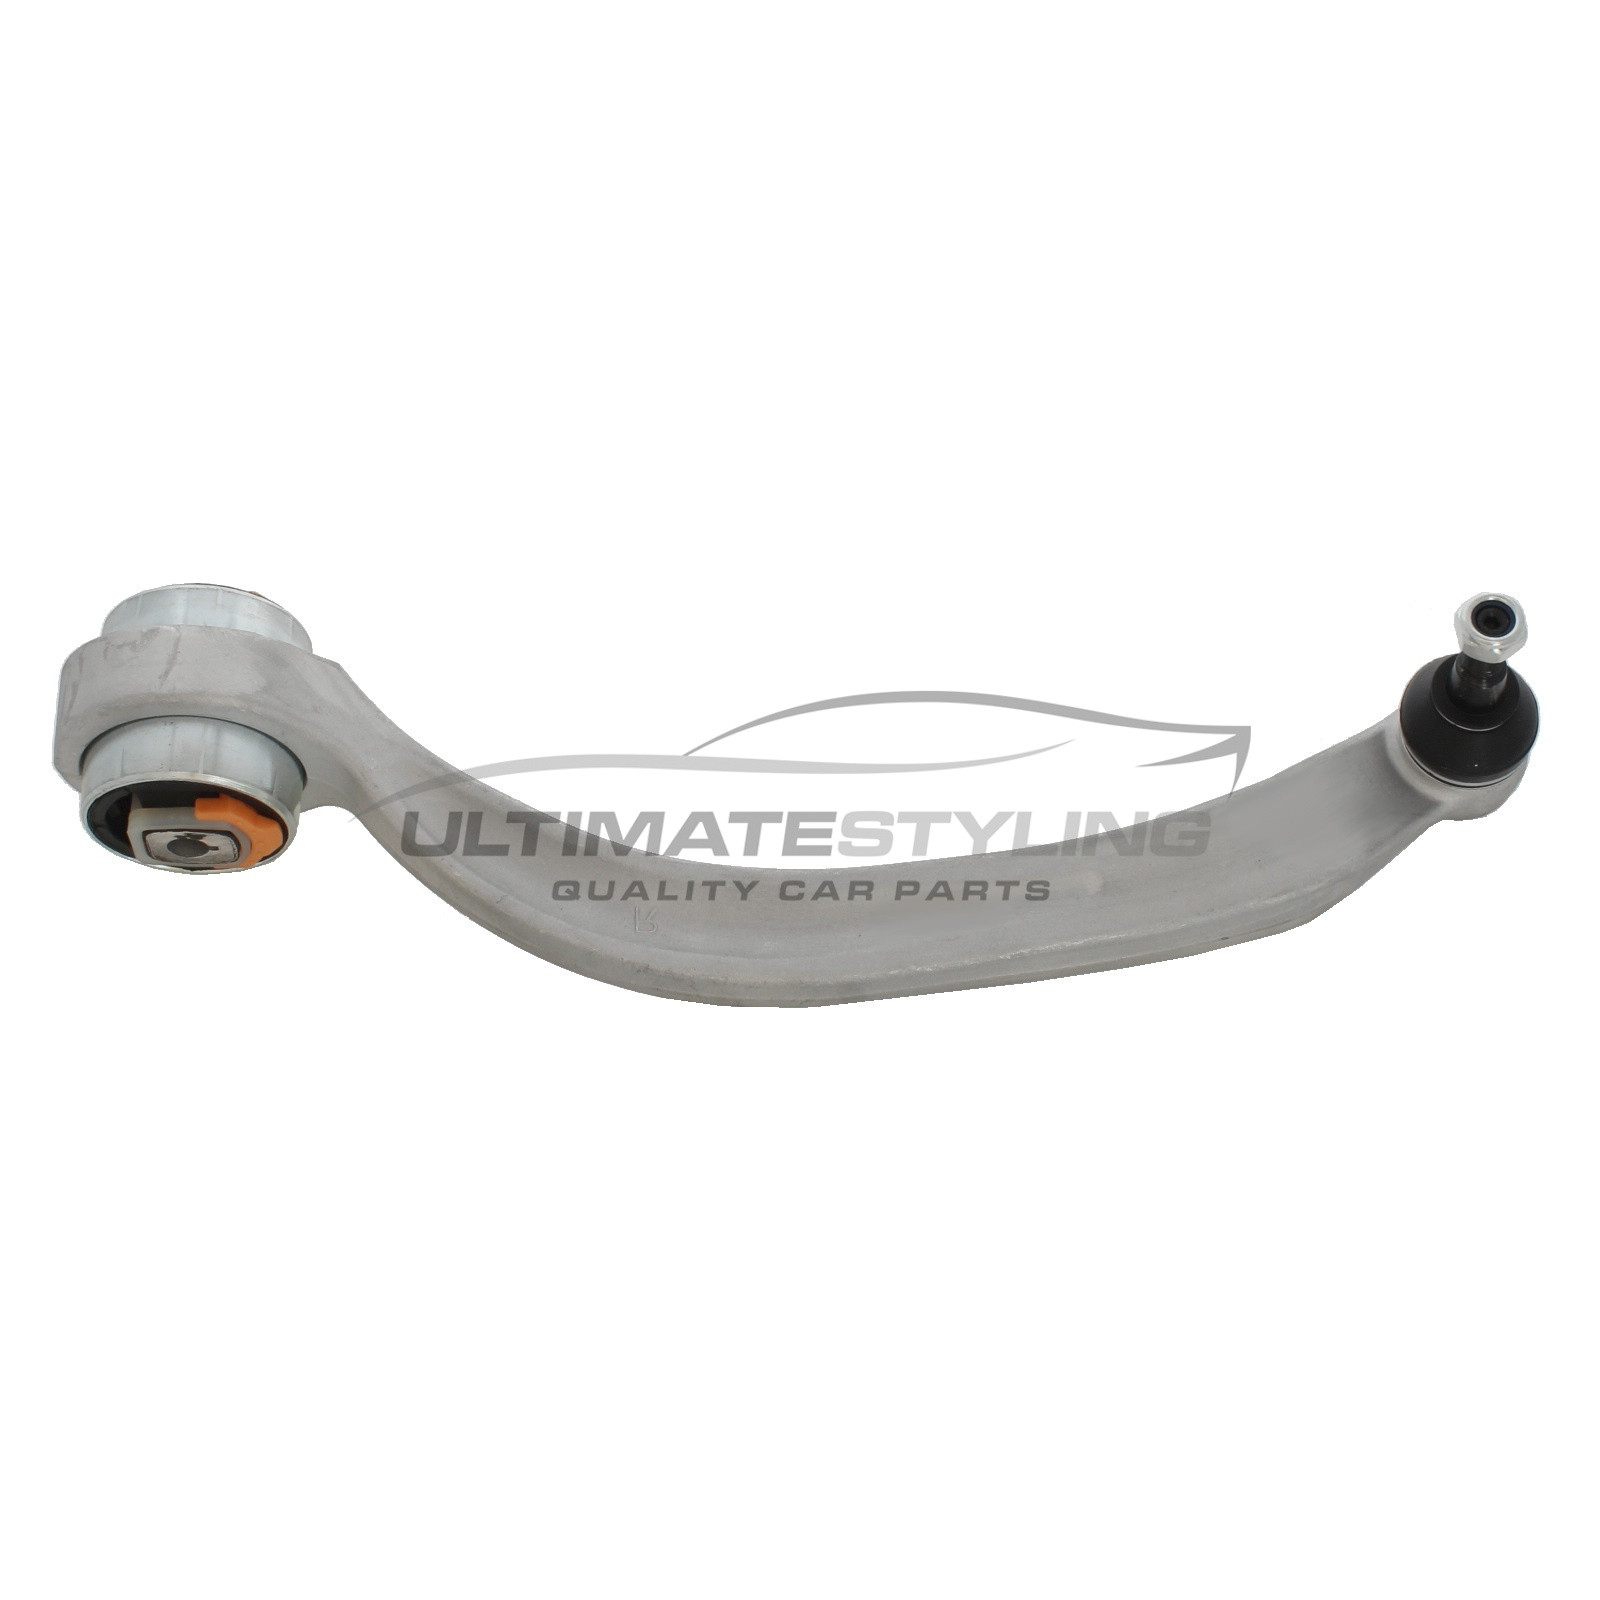 Audi A4, A6, A8, RS4, RS6, S4, S6, S8 / Seat Exeo 2009-2013 / Skoda Superb 2002-2008 / VW Passat 1997-2005 Front Lower Suspension Arm Alloy Including 15.6mm Ball Joint and Rear Bush Rear of Wheel Passenger Side Left Hand